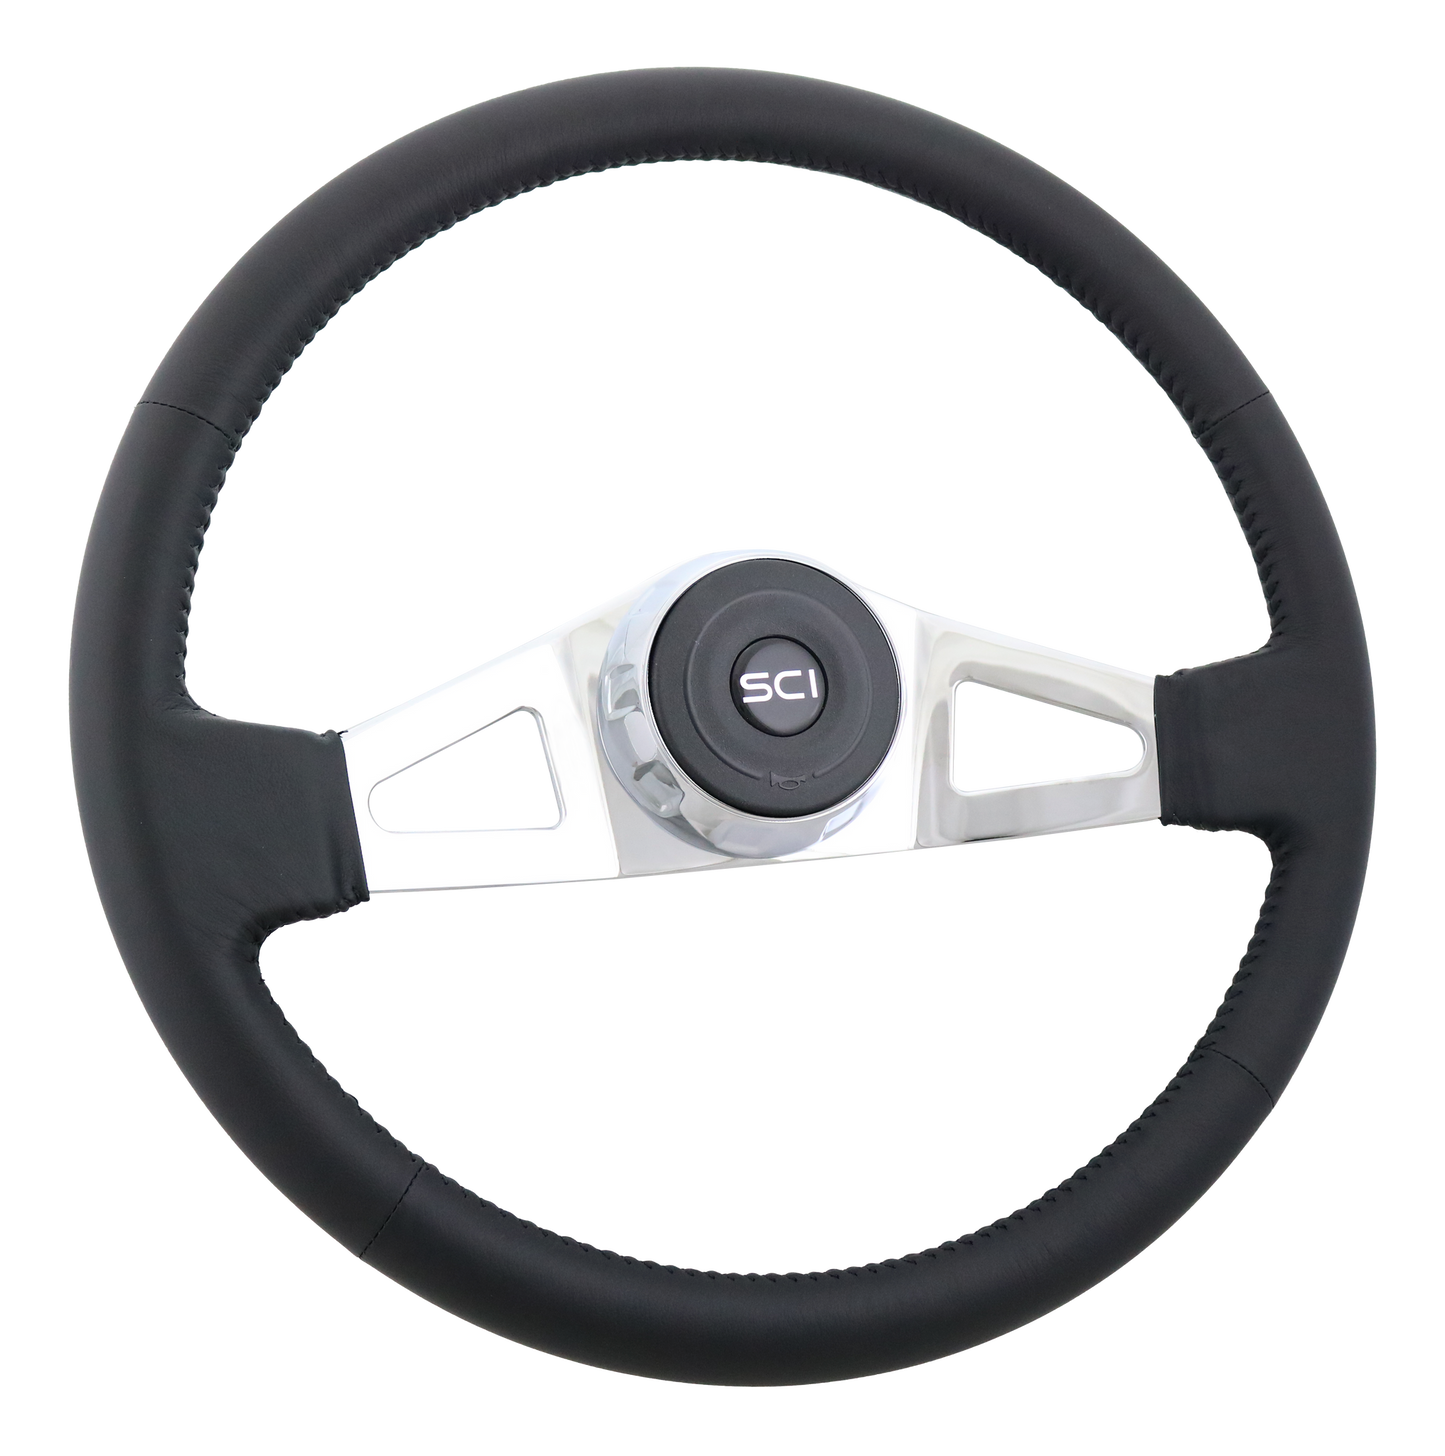 18" Steering Wheel Manchester Top Grain Black Leather Rim, Polished Chrome 2-Spokes w/Triangle Cut Outs, Chrome Bezel, Black Horn Button